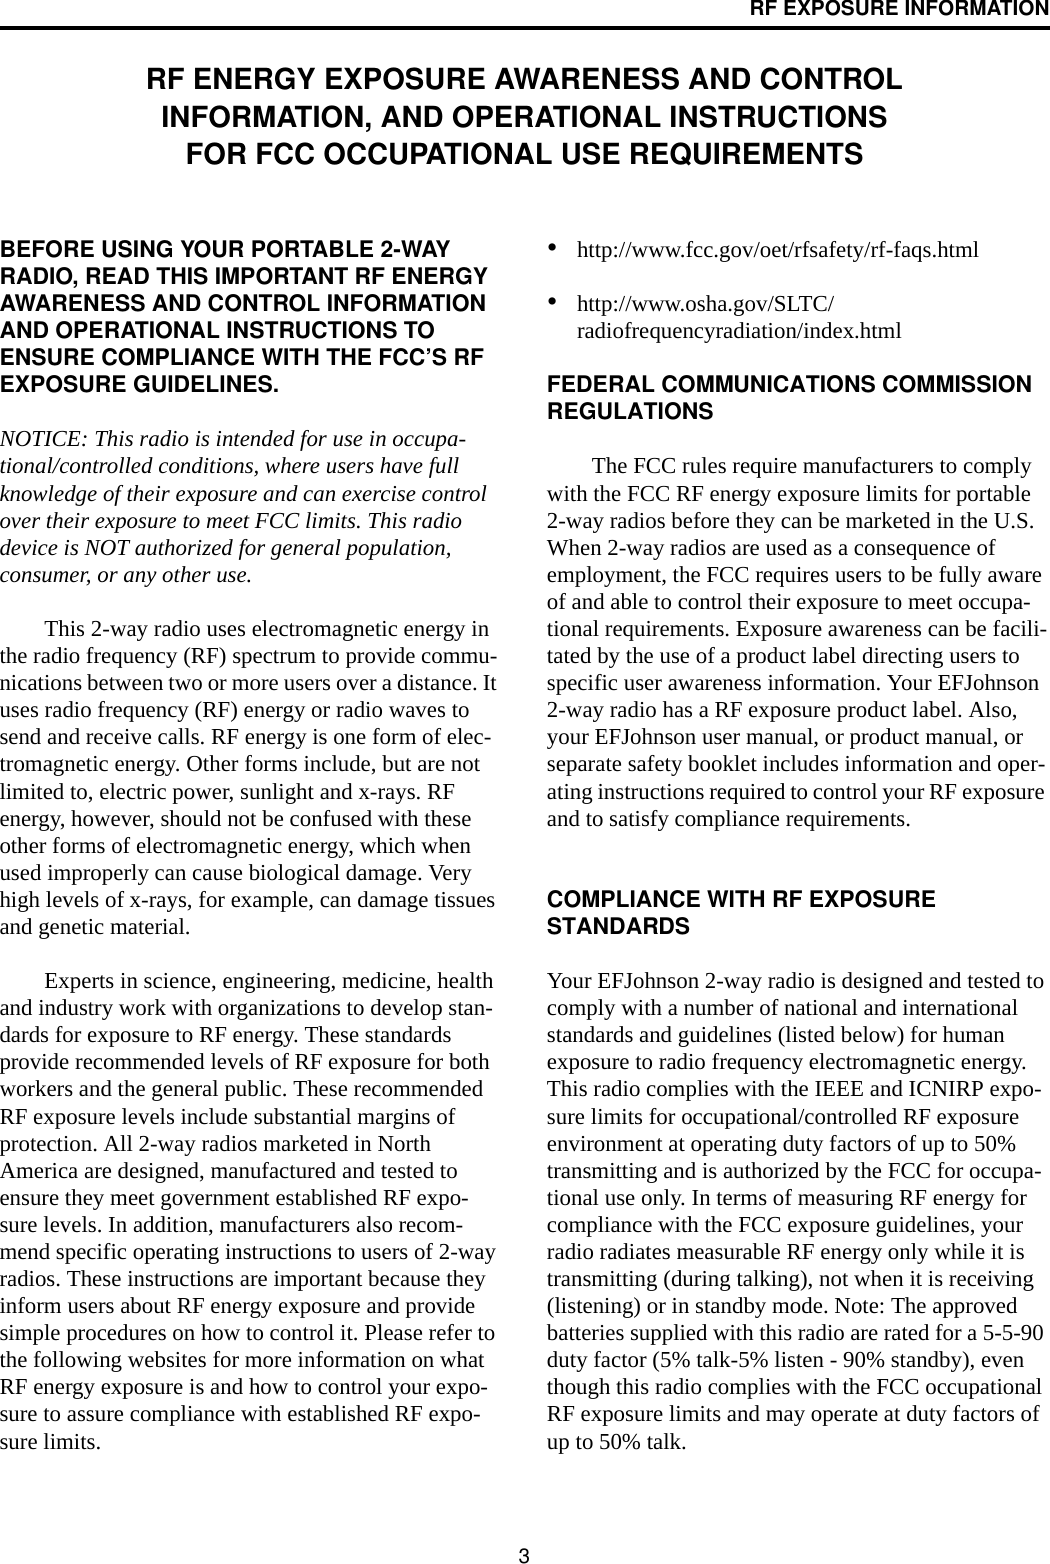 3RF EXPOSURE INFORMATIONRF ENERGY EXPOSURE AWARENESS AND CONTROL INFORMATION, AND OPERATIONAL INSTRUCTIONS FOR FCC OCCUPATIONAL USE REQUIREMENTSBEFORE USING YOUR PORTABLE 2-WAY RADIO, READ THIS IMPORTANT RF ENERGY AWARENESS AND CONTROL INFORMATION AND OPERATIONAL INSTRUCTIONS TO ENSURE COMPLIANCE WITH THE FCC’S RF EXPOSURE GUIDELINES.NOTICE: This radio is intended for use in occupa-tional/controlled conditions, where users have full knowledge of their exposure and can exercise control over their exposure to meet FCC limits. This radio device is NOT authorized for general population, consumer, or any other use.This 2-way radio uses electromagnetic energy in the radio frequency (RF) spectrum to provide commu-nications between two or more users over a distance. It uses radio frequency (RF) energy or radio waves to send and receive calls. RF energy is one form of elec-tromagnetic energy. Other forms include, but are not limited to, electric power, sunlight and x-rays. RF energy, however, should not be confused with these other forms of electromagnetic energy, which when used improperly can cause biological damage. Very high levels of x-rays, for example, can damage tissues and genetic material. Experts in science, engineering, medicine, health and industry work with organizations to develop stan-dards for exposure to RF energy. These standards provide recommended levels of RF exposure for both workers and the general public. These recommended RF exposure levels include substantial margins of protection. All 2-way radios marketed in North America are designed, manufactured and tested to ensure they meet government established RF expo-sure levels. In addition, manufacturers also recom-mend specific operating instructions to users of 2-way radios. These instructions are important because they inform users about RF energy exposure and provide simple procedures on how to control it. Please refer to the following websites for more information on what RF energy exposure is and how to control your expo-sure to assure compliance with established RF expo-sure limits. •http://www.fcc.gov/oet/rfsafety/rf-faqs.html•http://www.osha.gov/SLTC/radiofrequencyradiation/index.html FEDERAL COMMUNICATIONS COMMISSION REGULATIONSThe FCC rules require manufacturers to comply with the FCC RF energy exposure limits for portable 2-way radios before they can be marketed in the U.S. When 2-way radios are used as a consequence of employment, the FCC requires users to be fully aware of and able to control their exposure to meet occupa-tional requirements. Exposure awareness can be facili-tated by the use of a product label directing users to specific user awareness information. Your EFJohnson 2-way radio has a RF exposure product label. Also, your EFJohnson user manual, or product manual, or separate safety booklet includes information and oper-ating instructions required to control your RF exposure and to satisfy compliance requirements. COMPLIANCE WITH RF EXPOSURE STANDARDSYour EFJohnson 2-way radio is designed and tested to comply with a number of national and international standards and guidelines (listed below) for human exposure to radio frequency electromagnetic energy. This radio complies with the IEEE and ICNIRP expo-sure limits for occupational/controlled RF exposure environment at operating duty factors of up to 50% transmitting and is authorized by the FCC for occupa-tional use only. In terms of measuring RF energy for compliance with the FCC exposure guidelines, your radio radiates measurable RF energy only while it is transmitting (during talking), not when it is receiving (listening) or in standby mode. Note: The approved batteries supplied with this radio are rated for a 5-5-90 duty factor (5% talk-5% listen - 90% standby), even though this radio complies with the FCC occupational RF exposure limits and may operate at duty factors of up to 50% talk. 